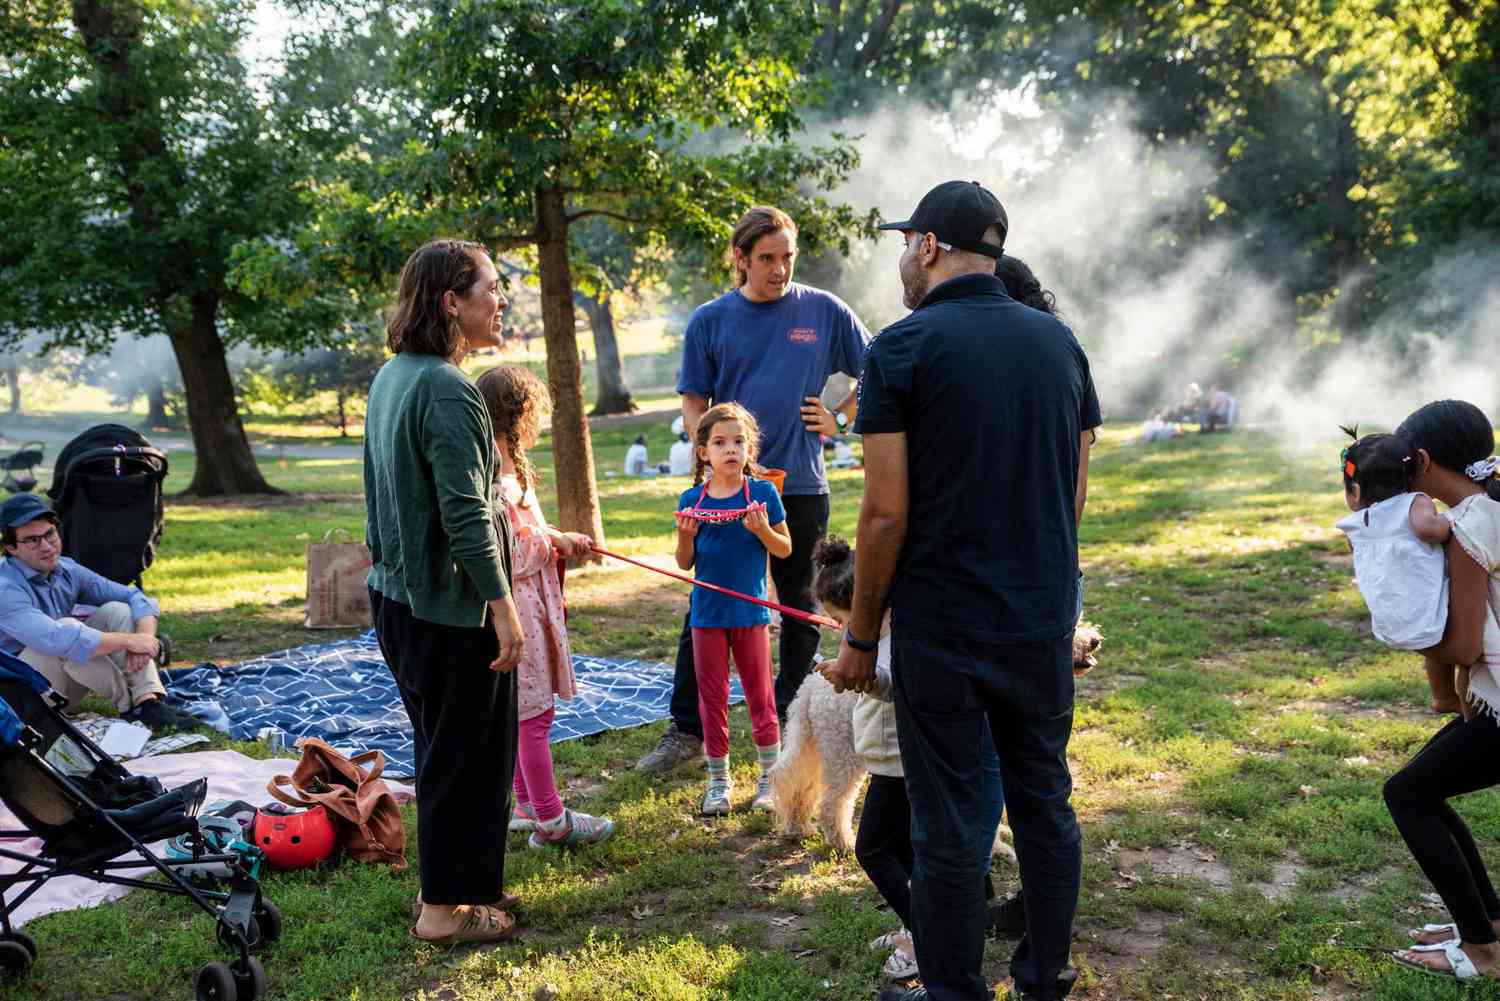 An image of a gathering of families during a picnic for the New Neighbors Project.